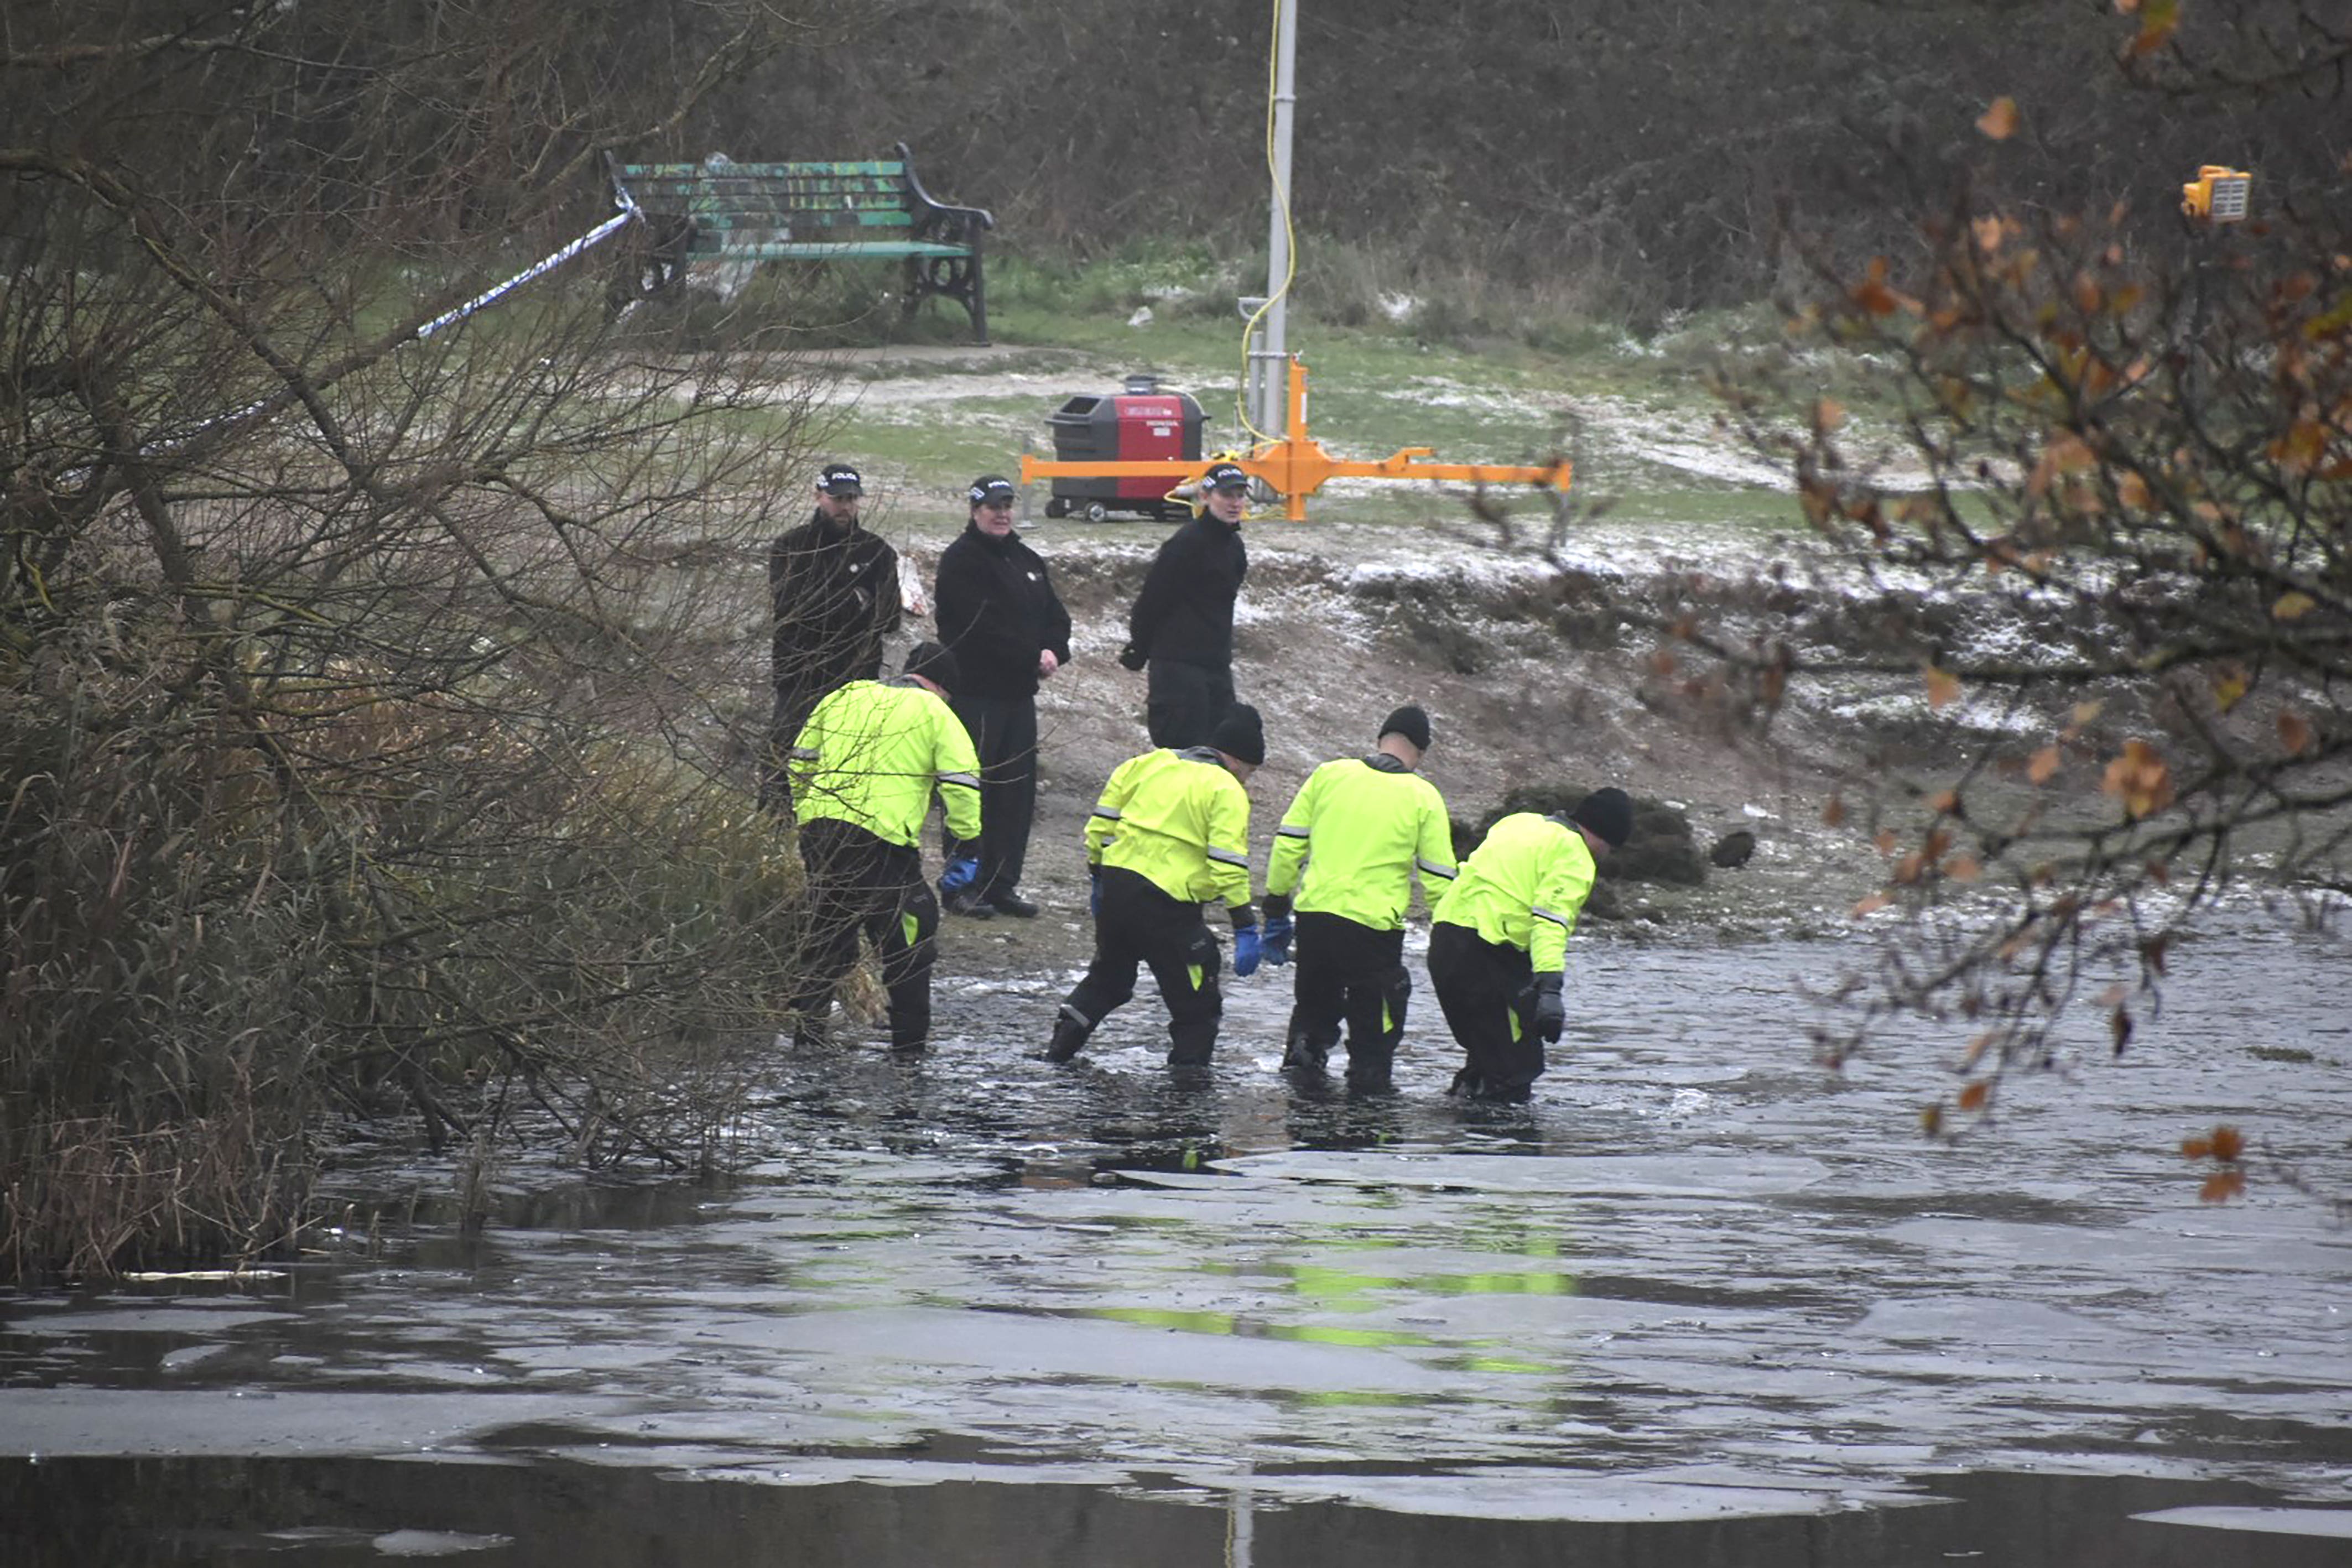 The boys aged eight, 10 and 11 died after falling through ice into a lake in Solihull in the West Midlands (PA)